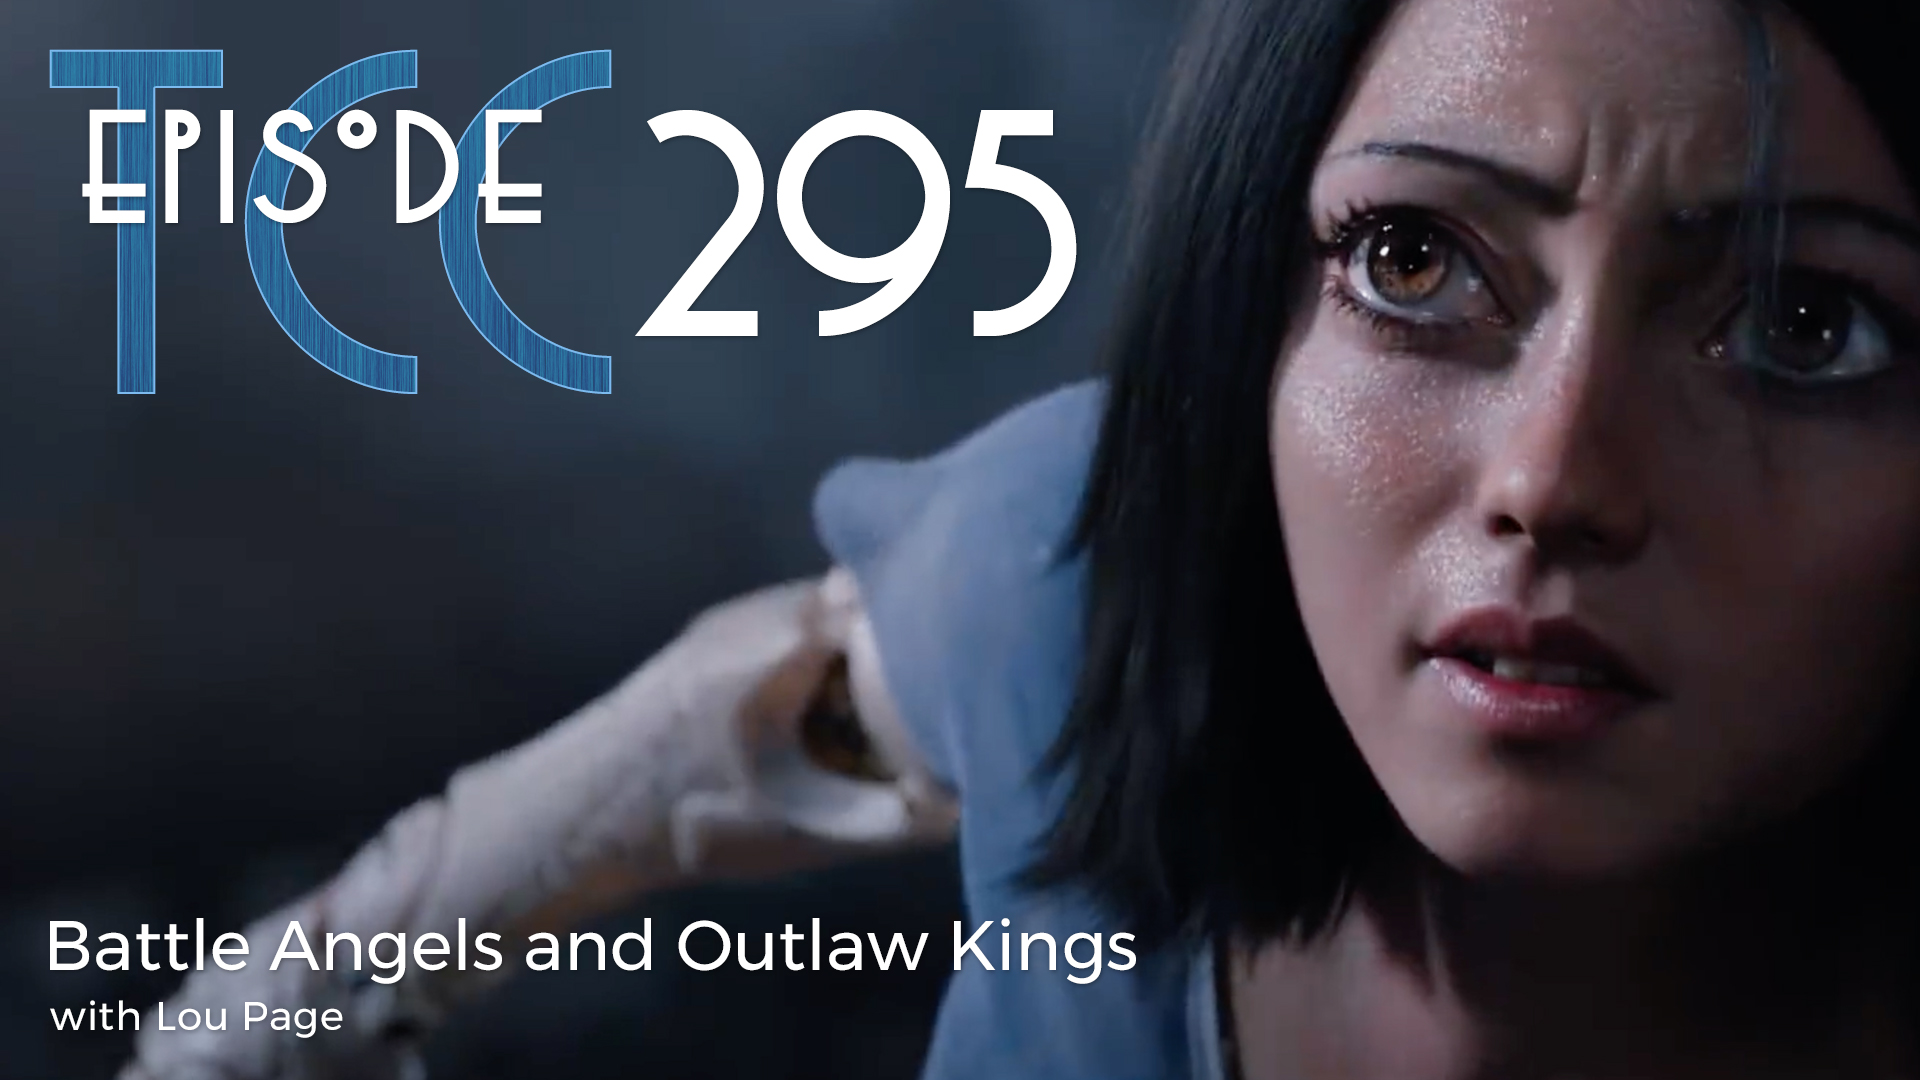 The Citadel Cafe 295: Battle Angels and Outlaw Kings